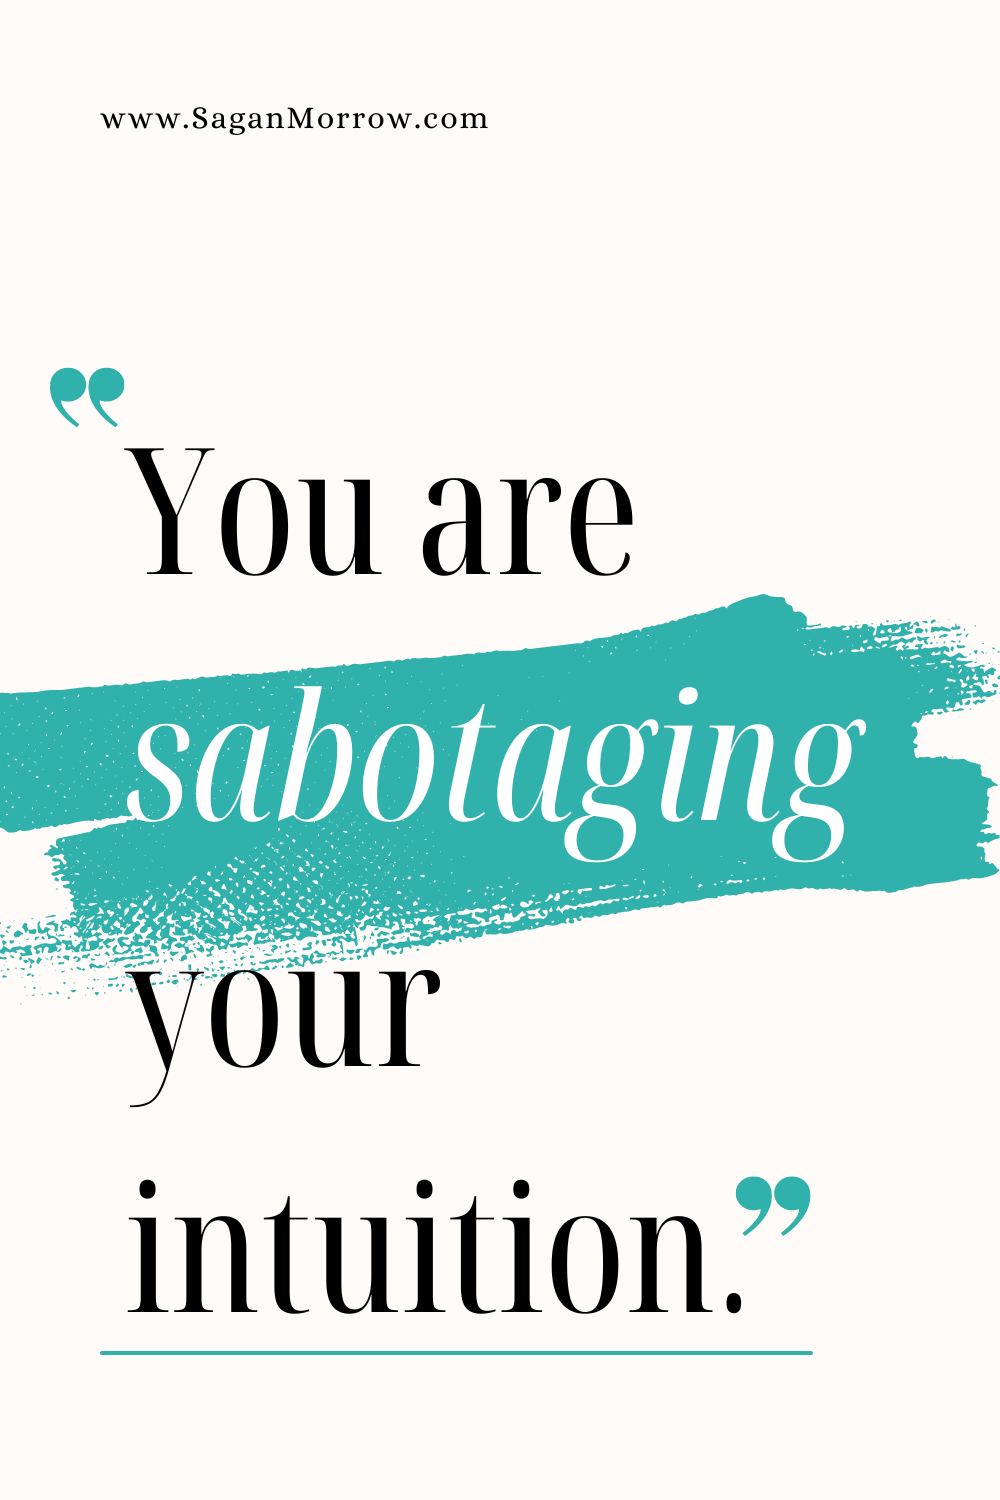 trust your intuition quotes - you are sabotaging your intuition